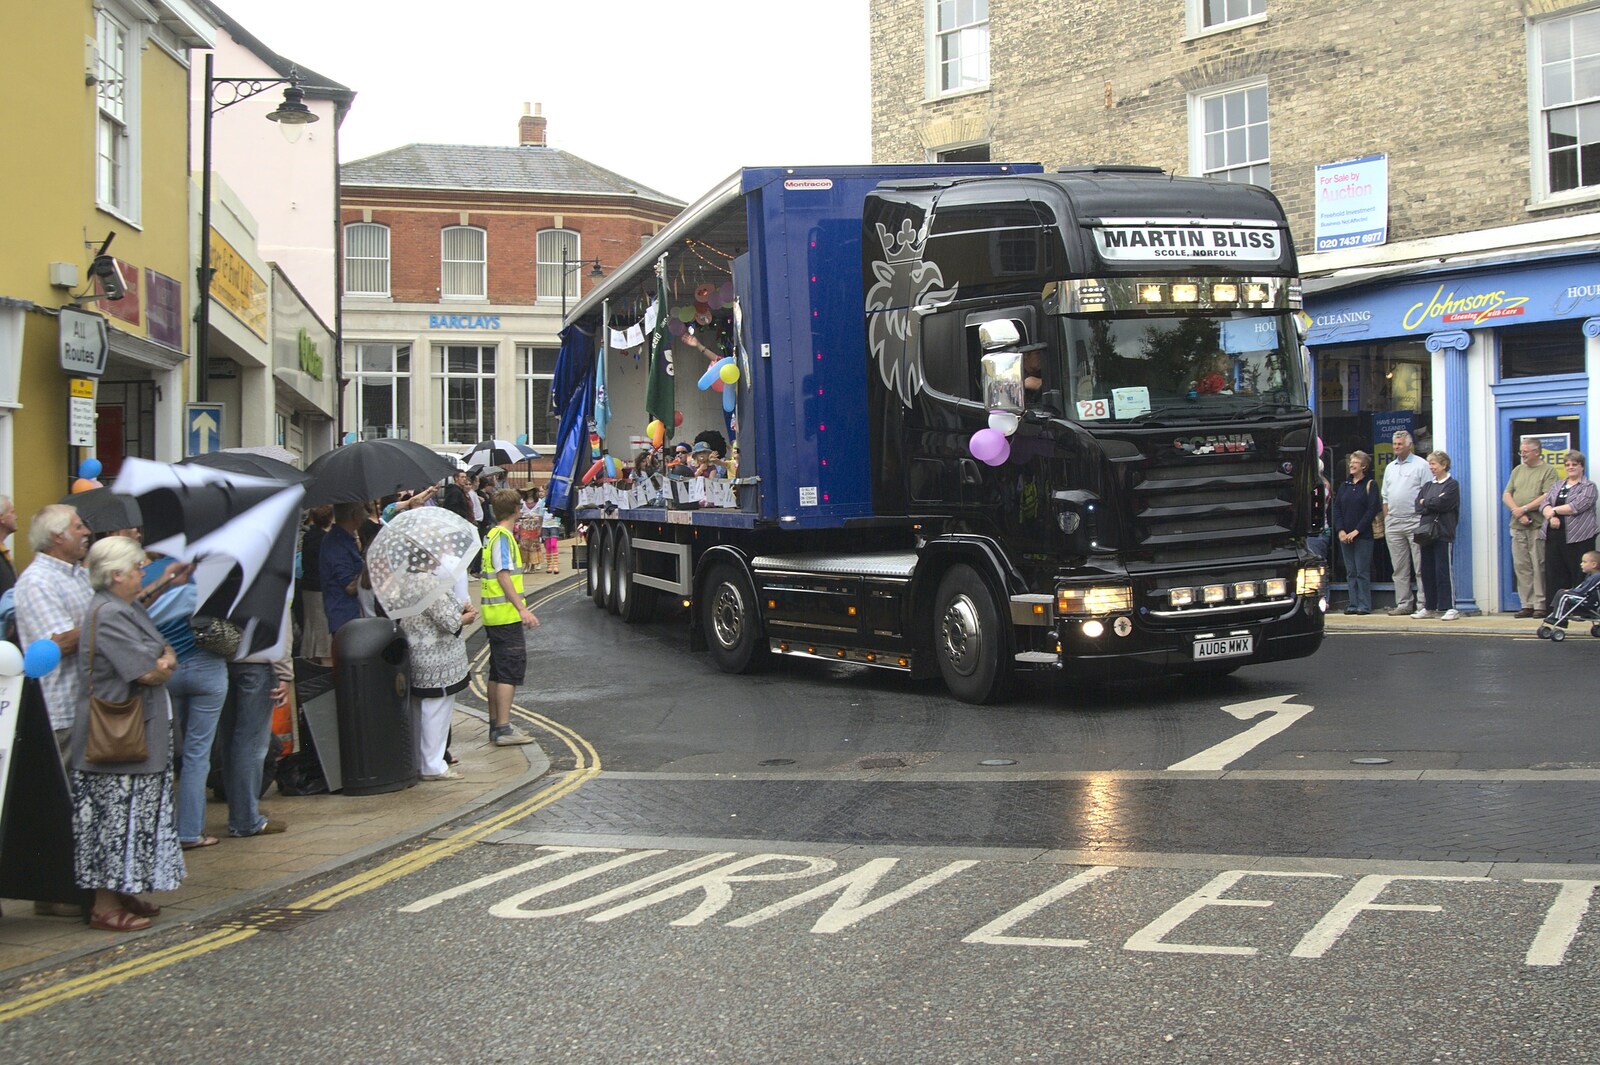 A heavy negotiates the turn from Diss Carnival Procession, Diss, Norfolk - 21st June 2009